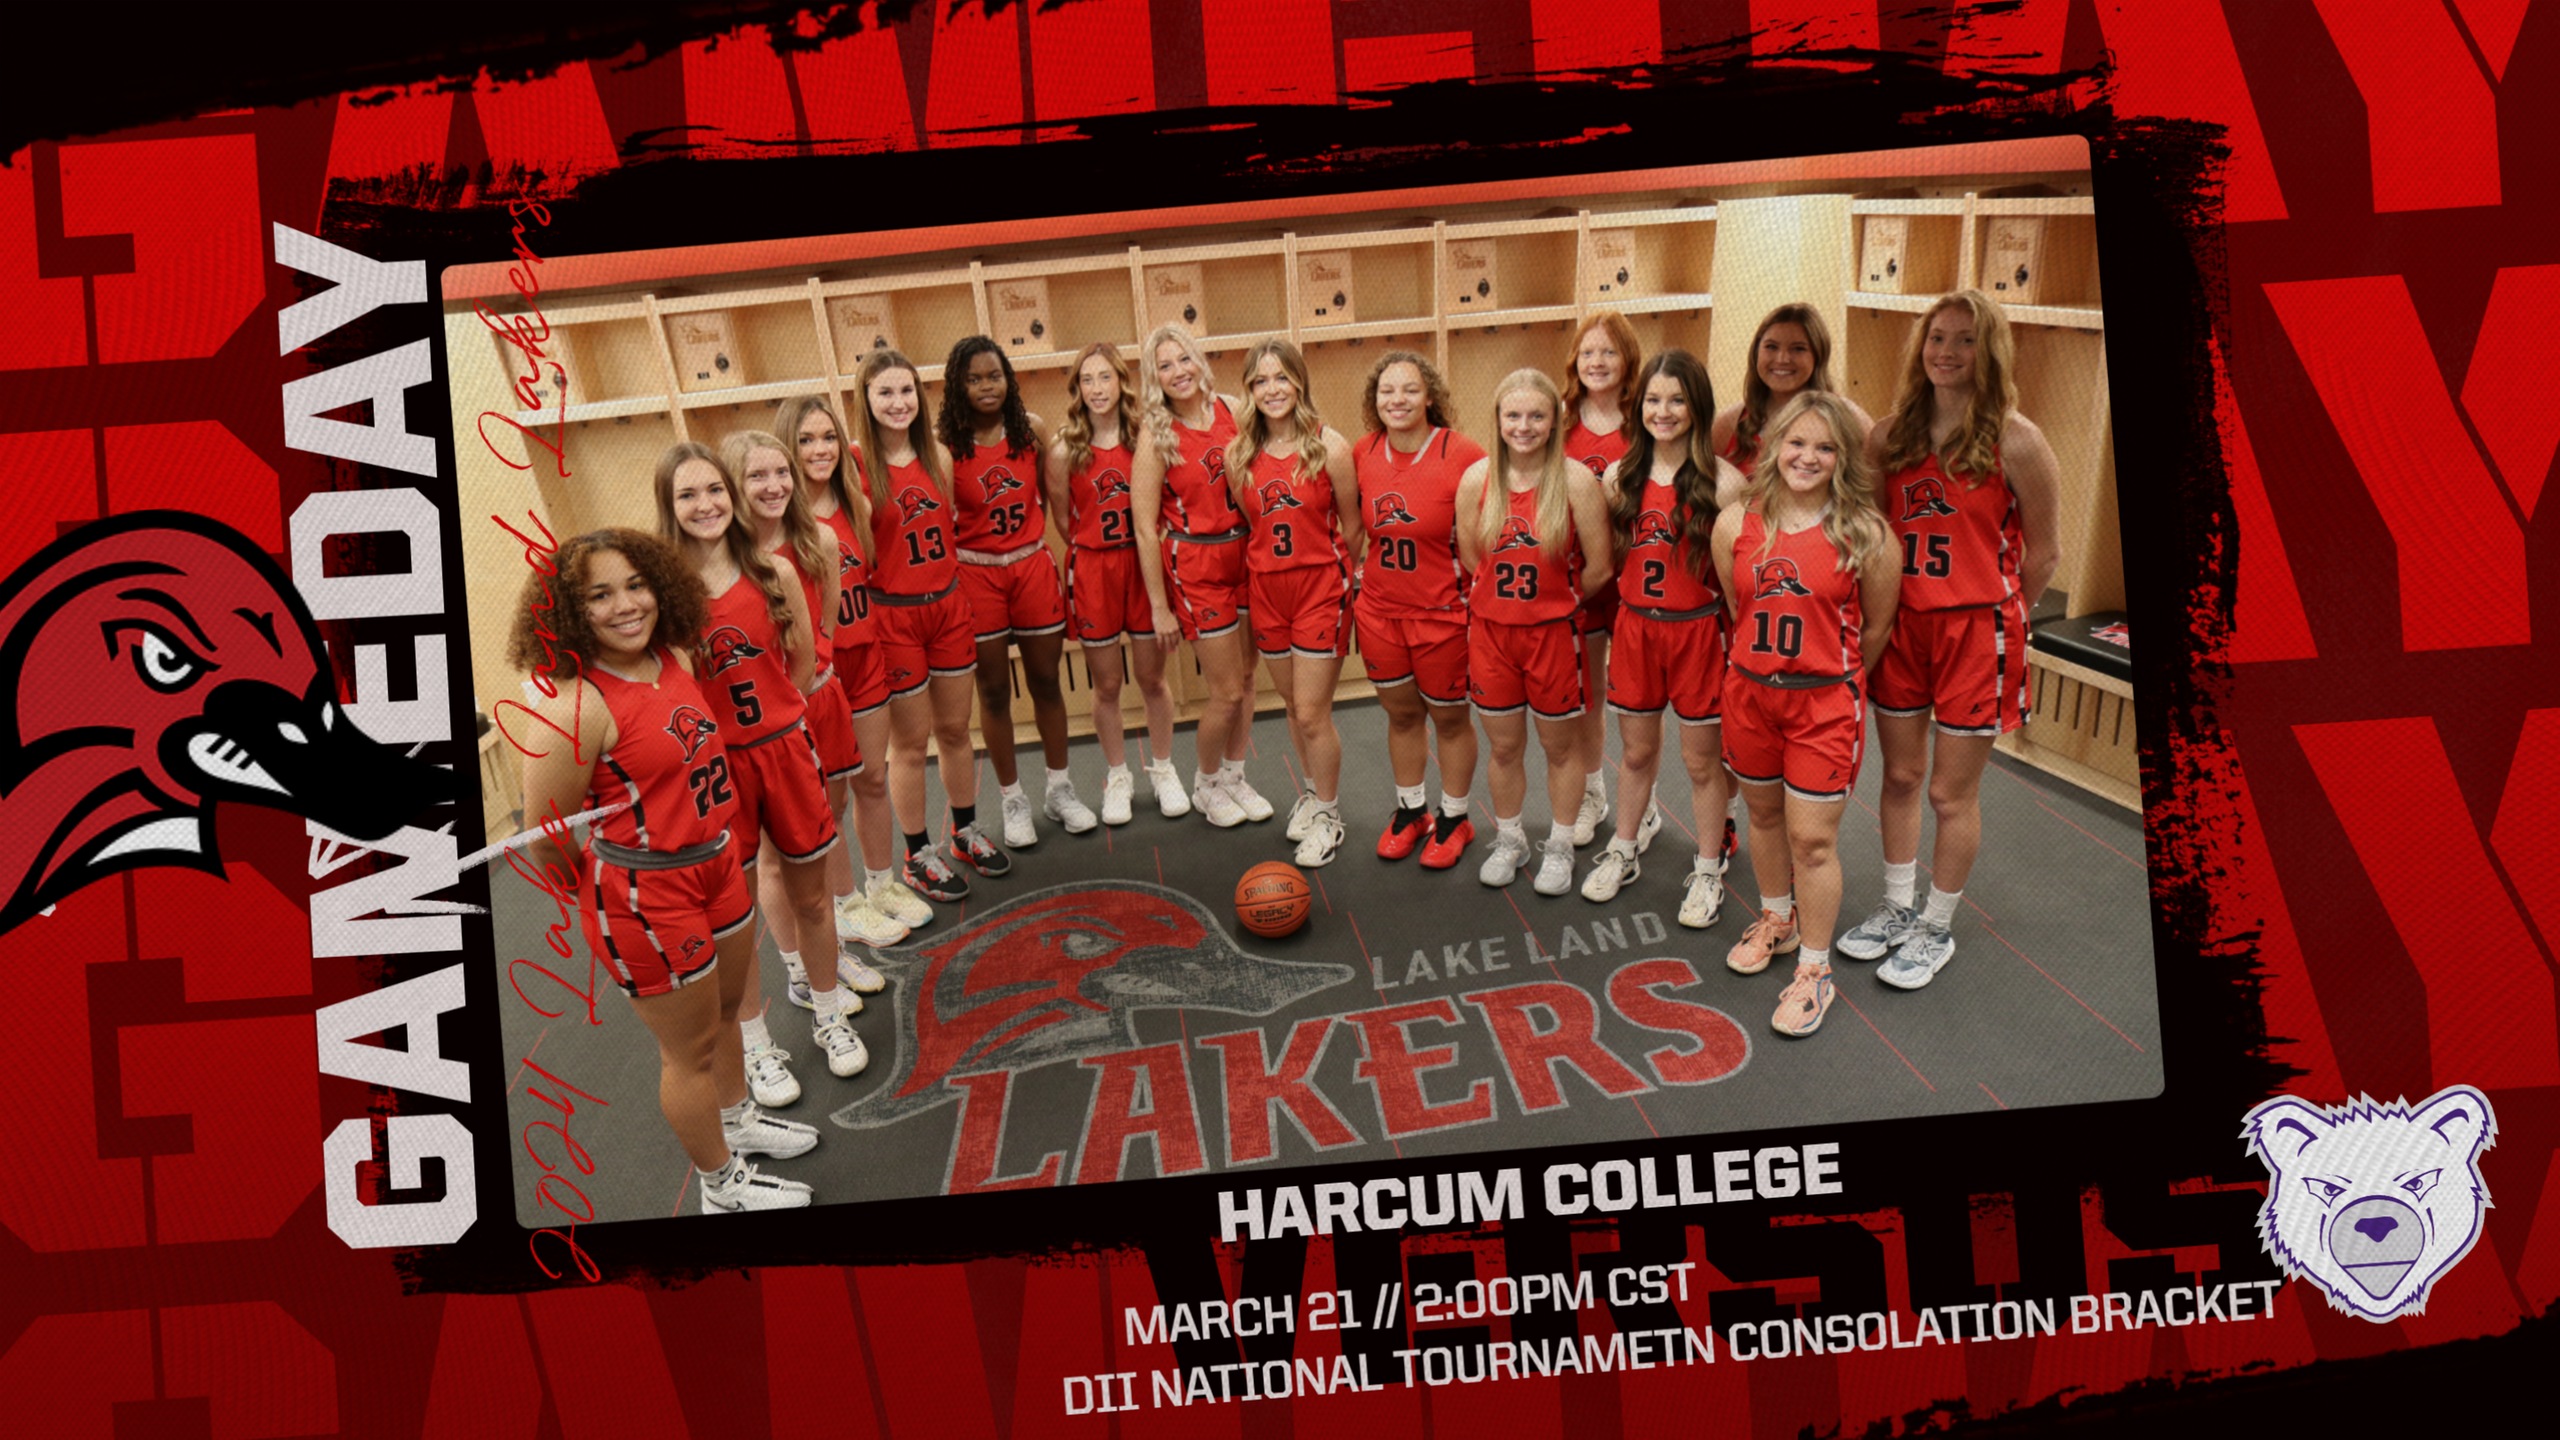 Laker are set to take on Harcum College at 2:00pm in Joplin, MO